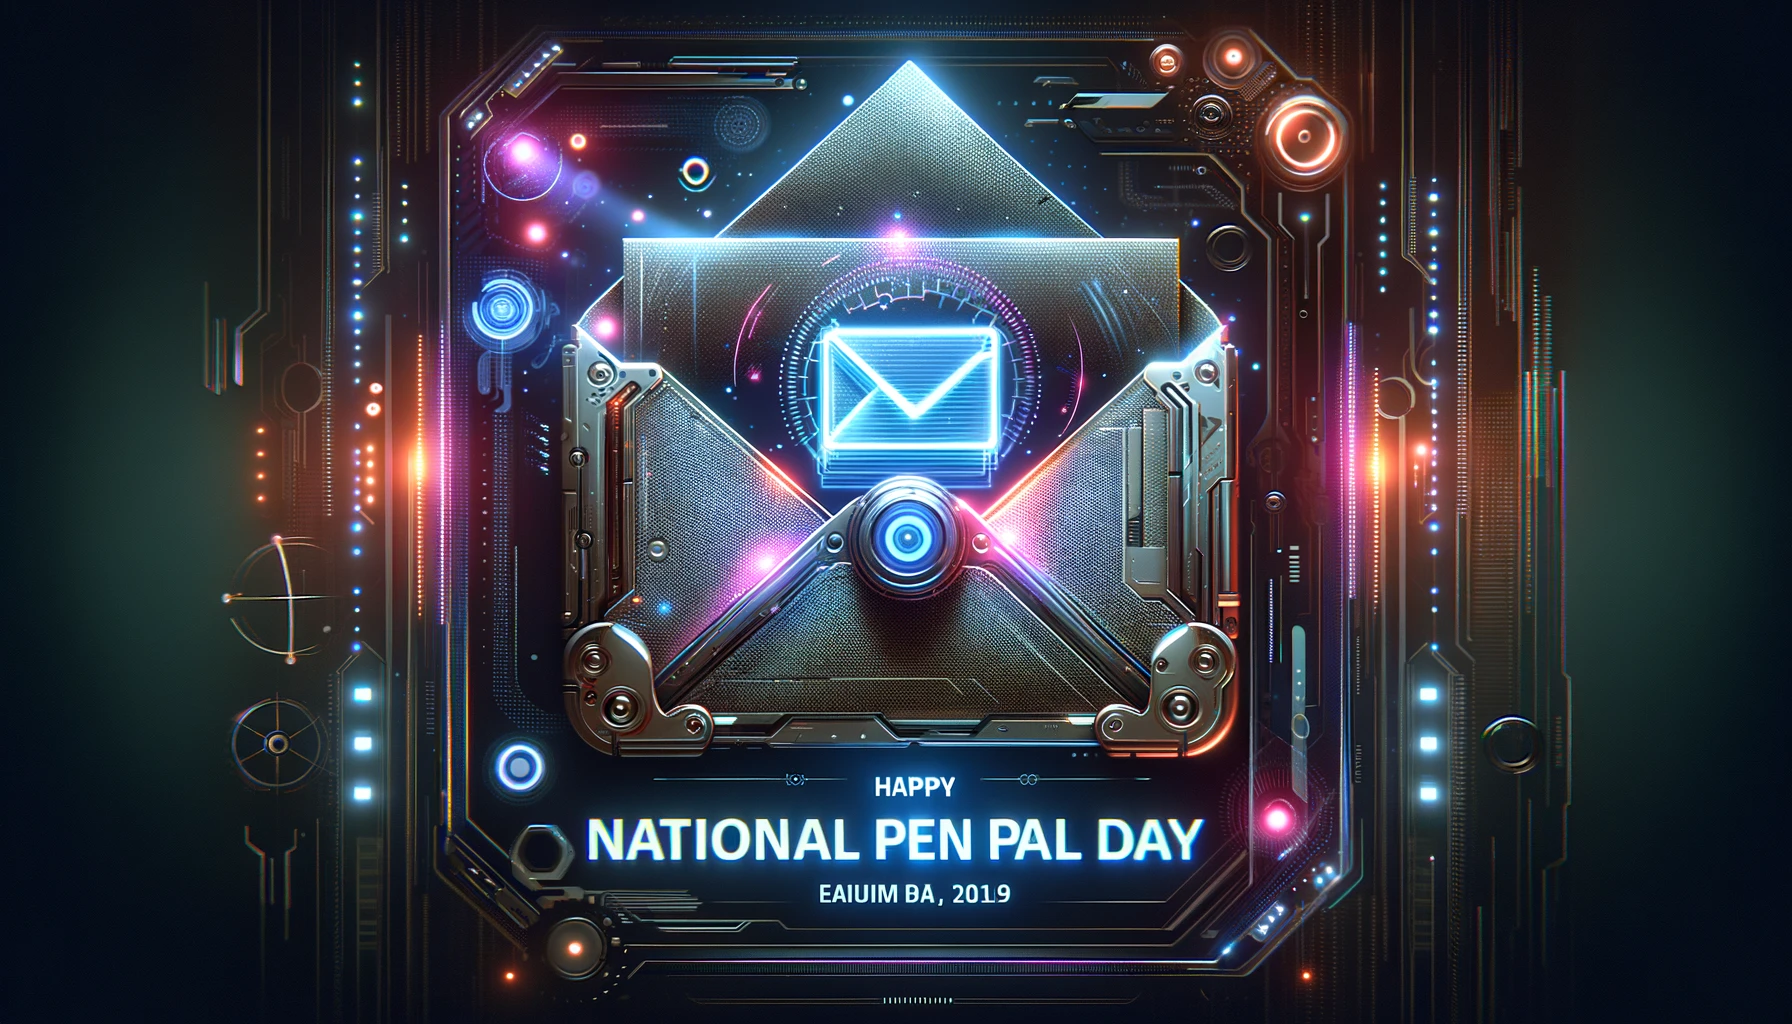 Creative Pen Pal Day Messages for Your Letter Friends